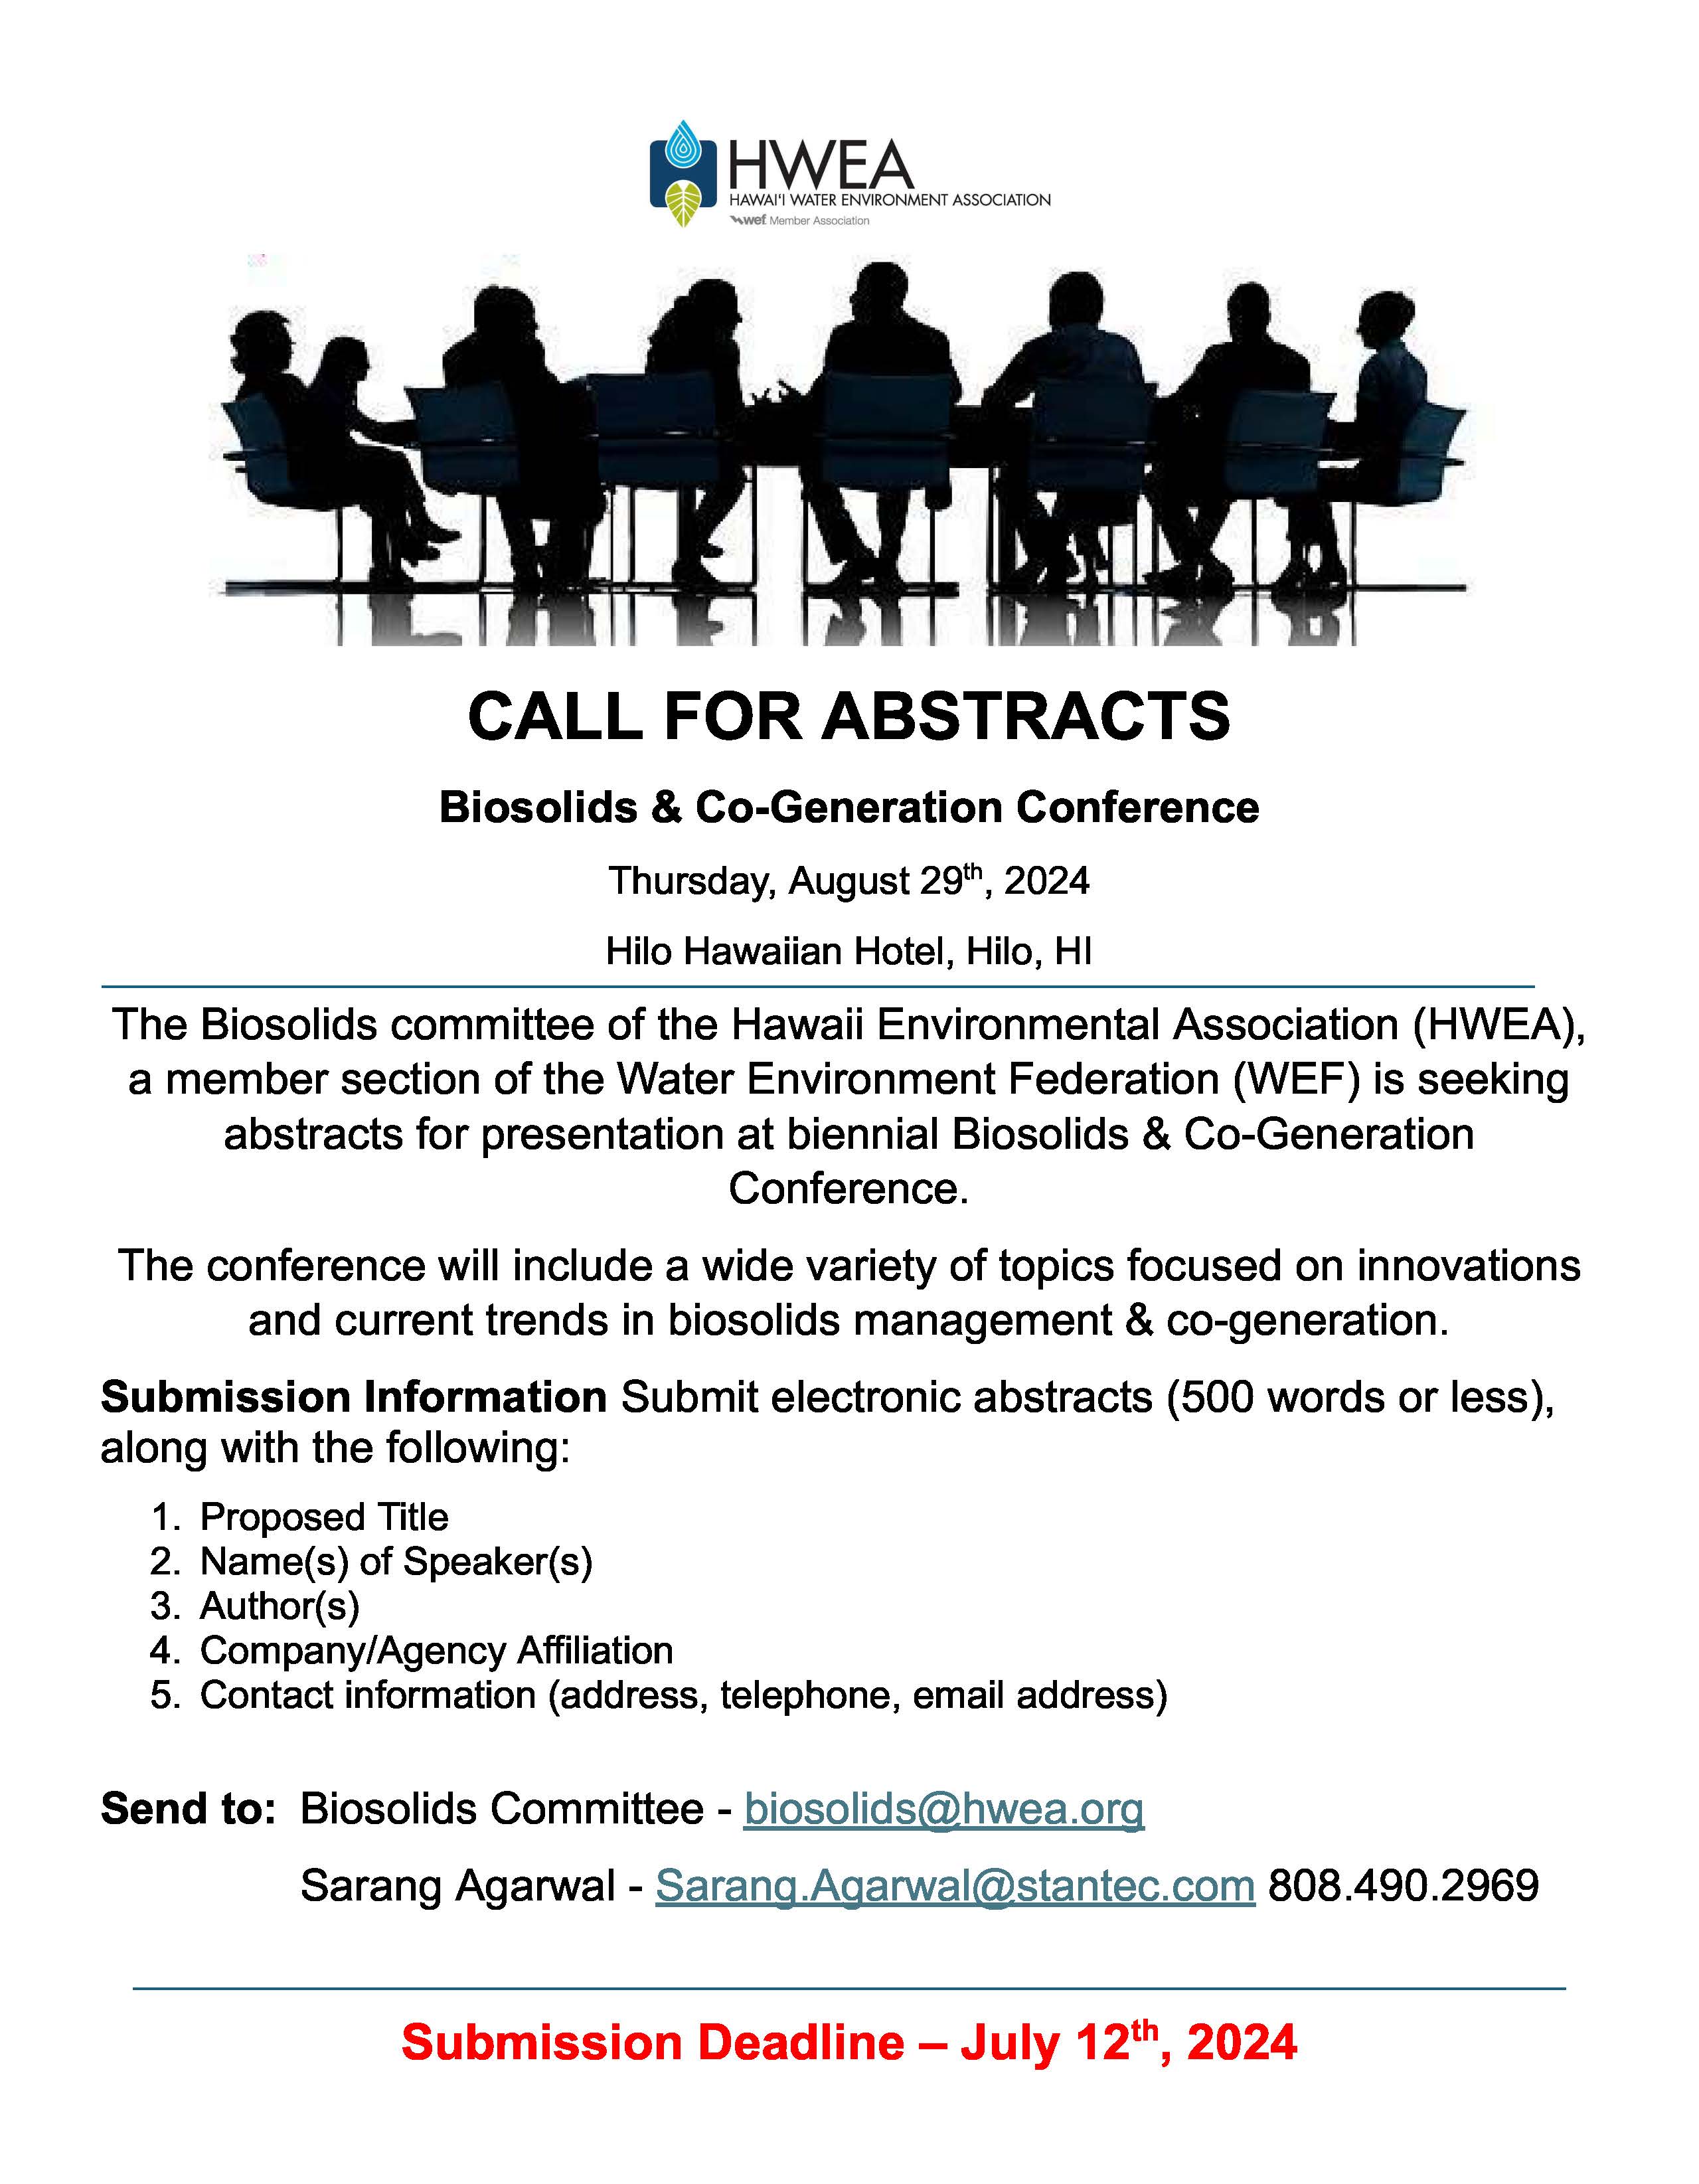 Call for Abstracts Biosolids conference